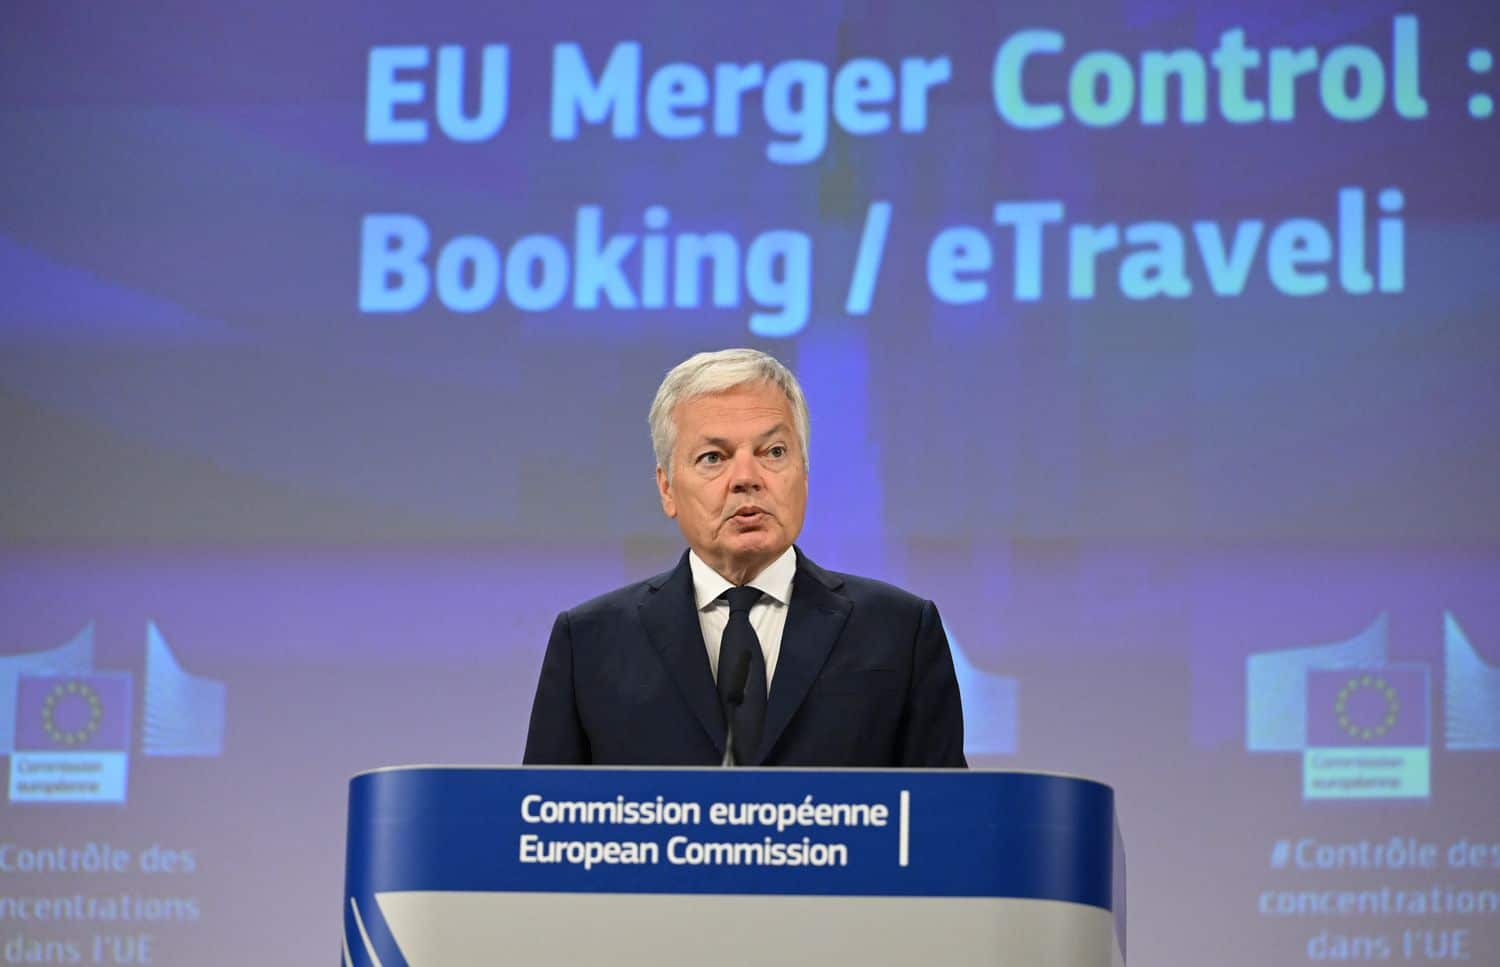 Booking.com takeover of eTraveli blocked by EU